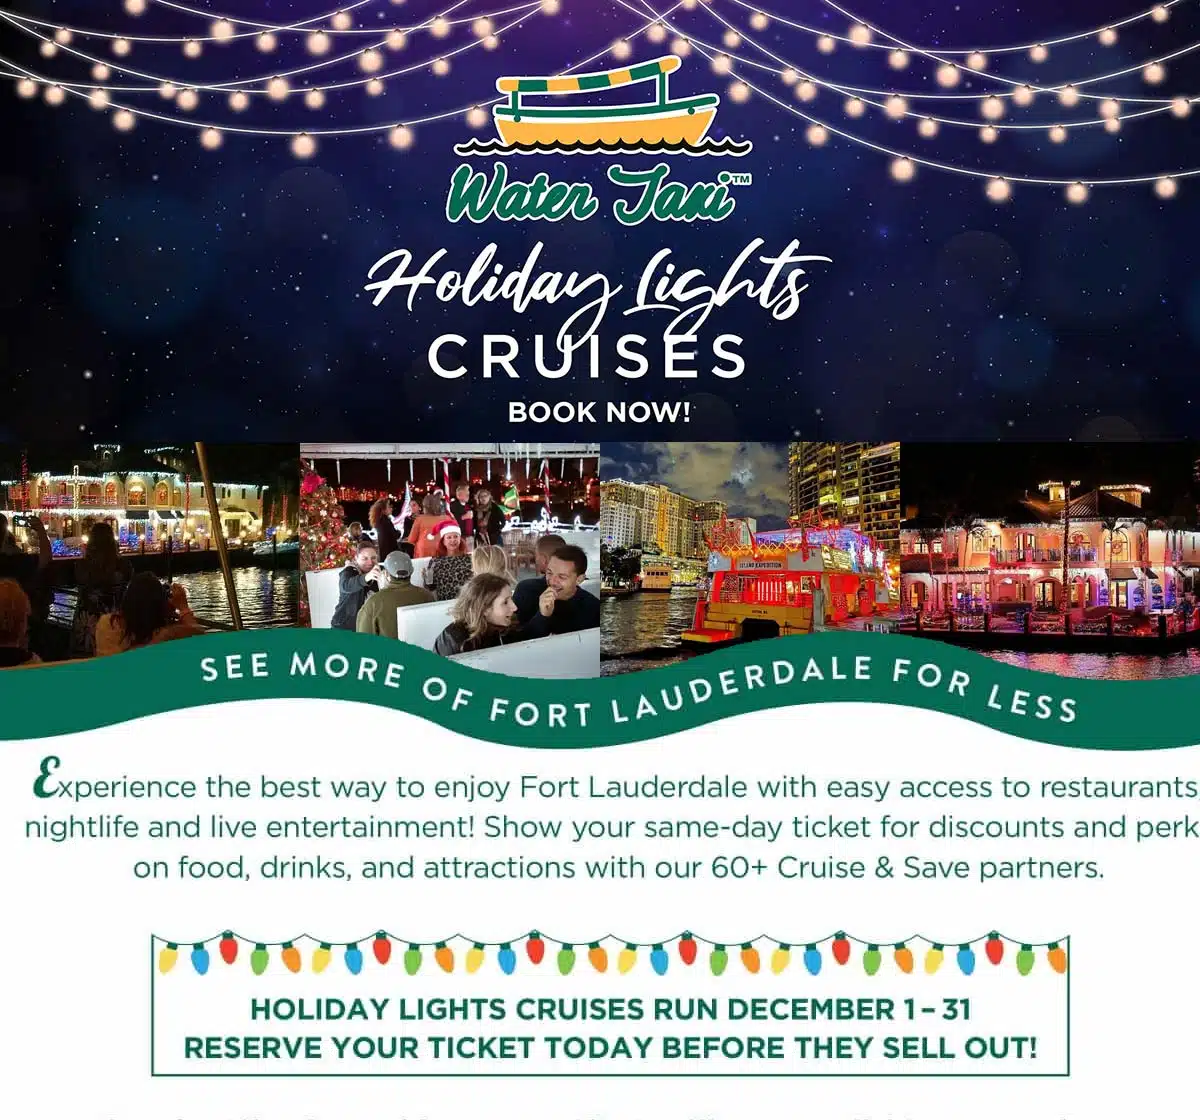 Las Olas Fort Lauderdale Water Taxi Holiday Lights